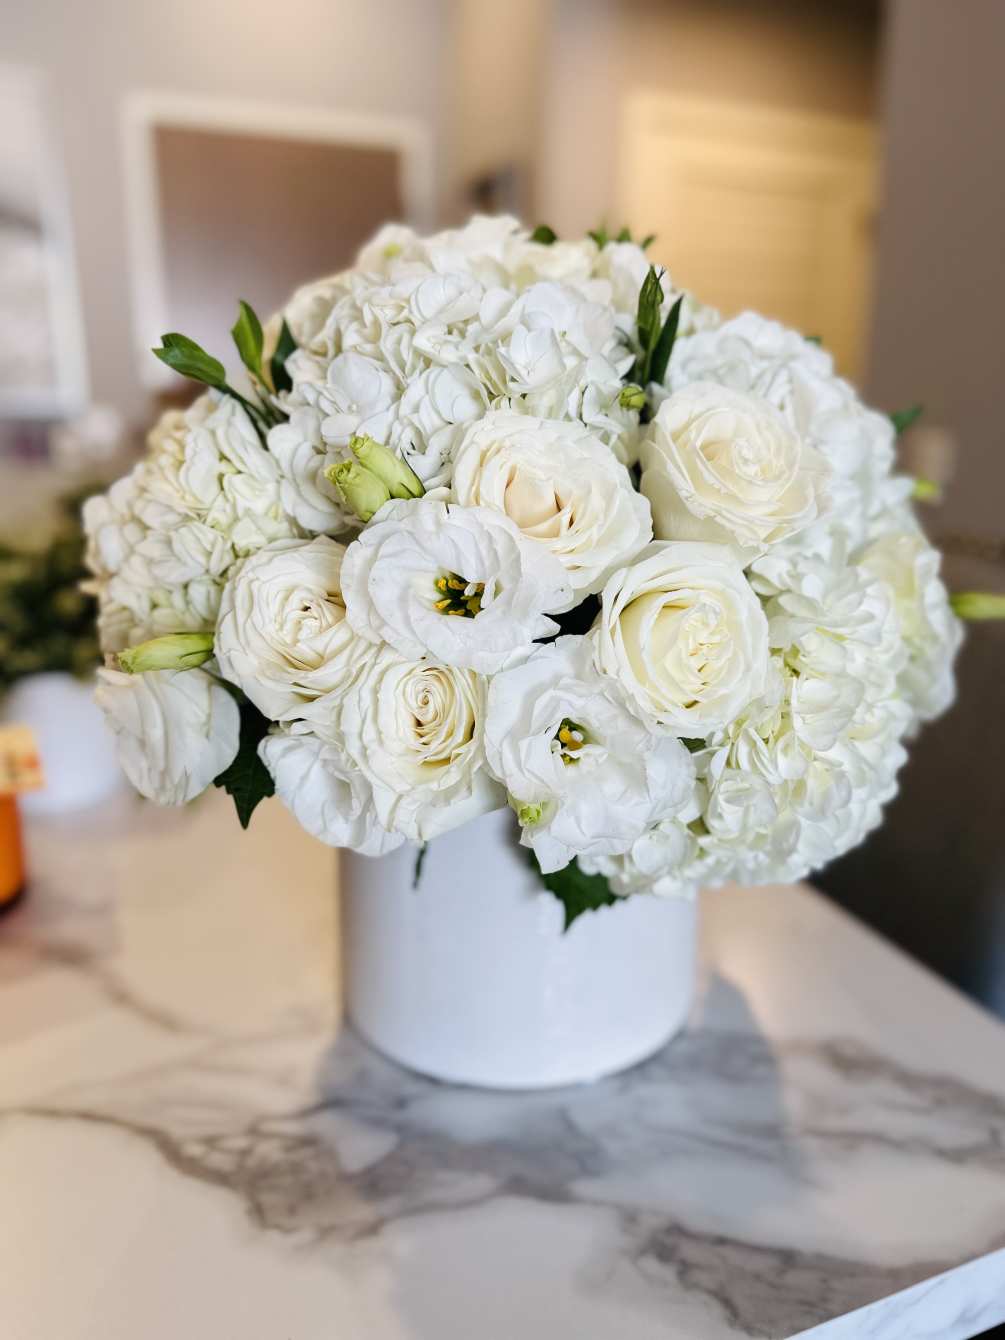 Purest of whites with hydrangea roses and soft lisianthus ins. Clean contemporary